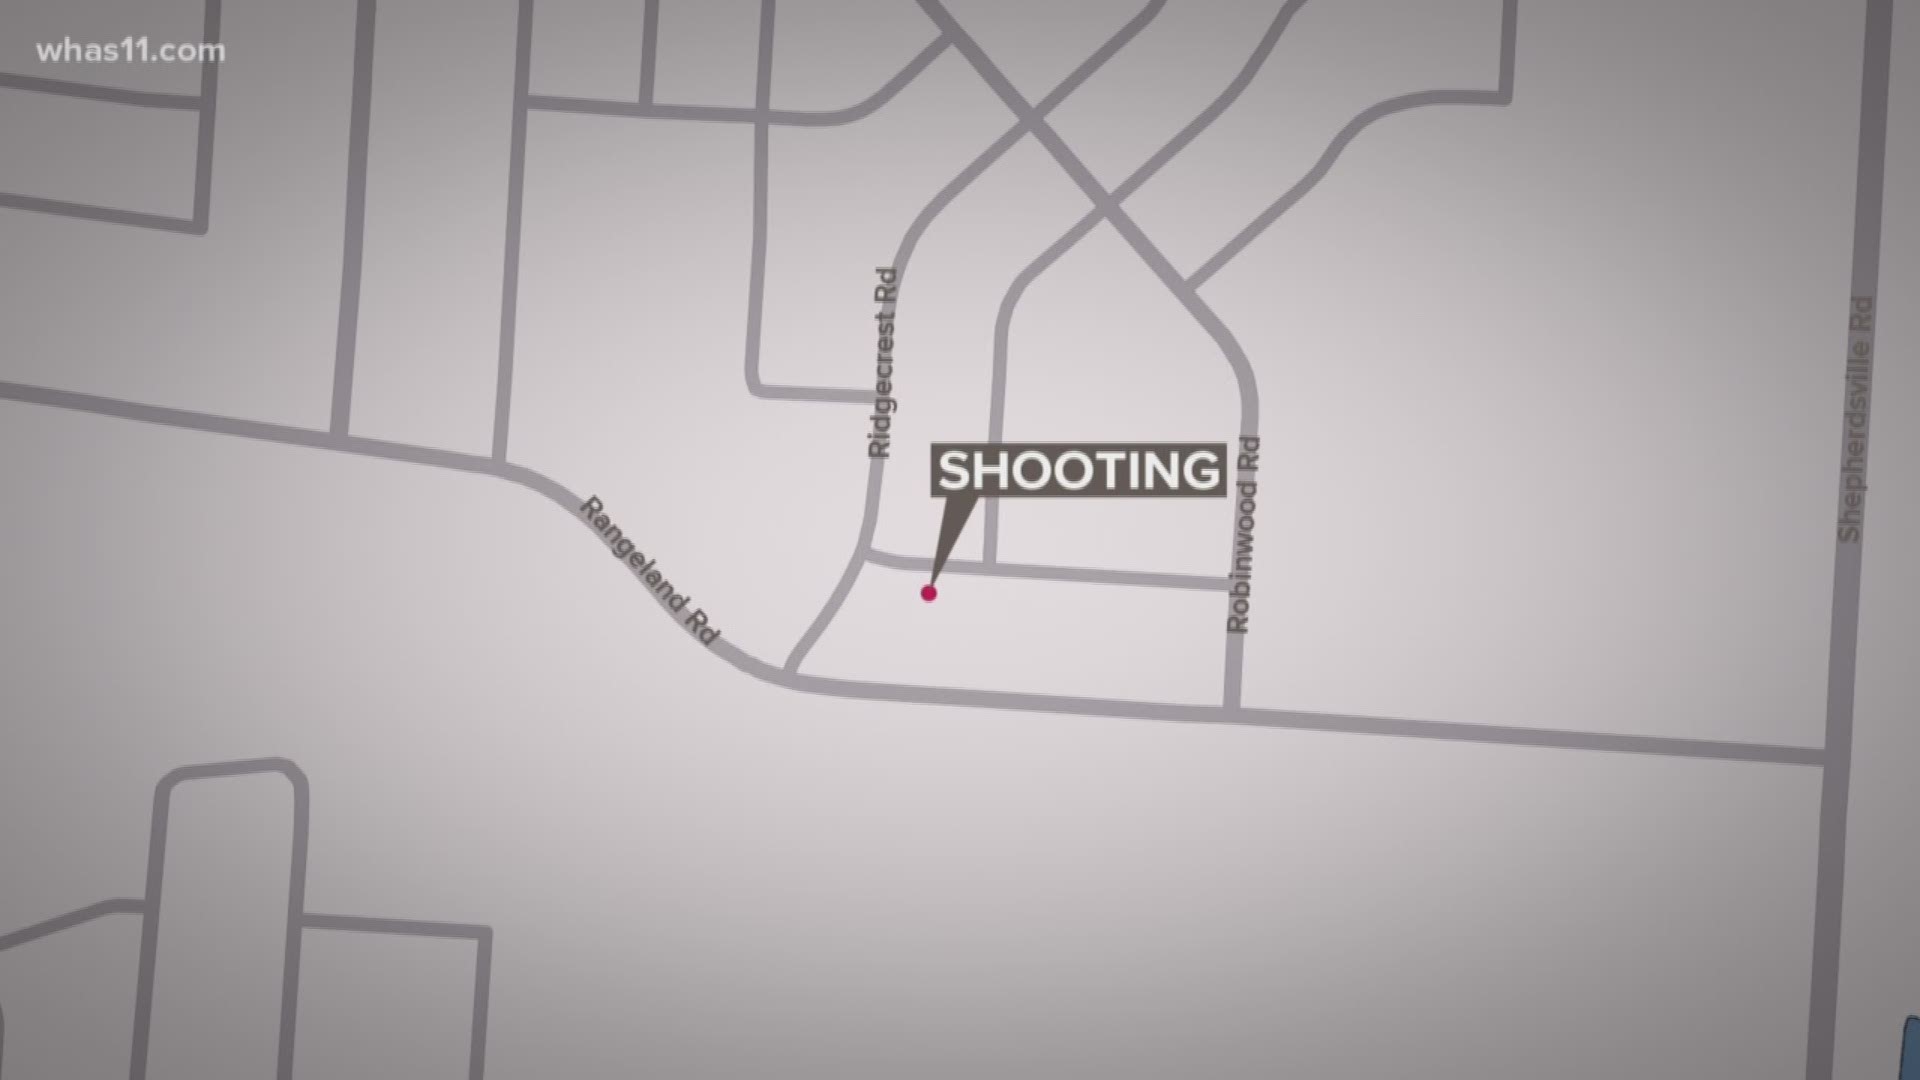 A 17-year-old is in the hospital with critical injuries after being shot at an apartment complex on Russett Place, police said.